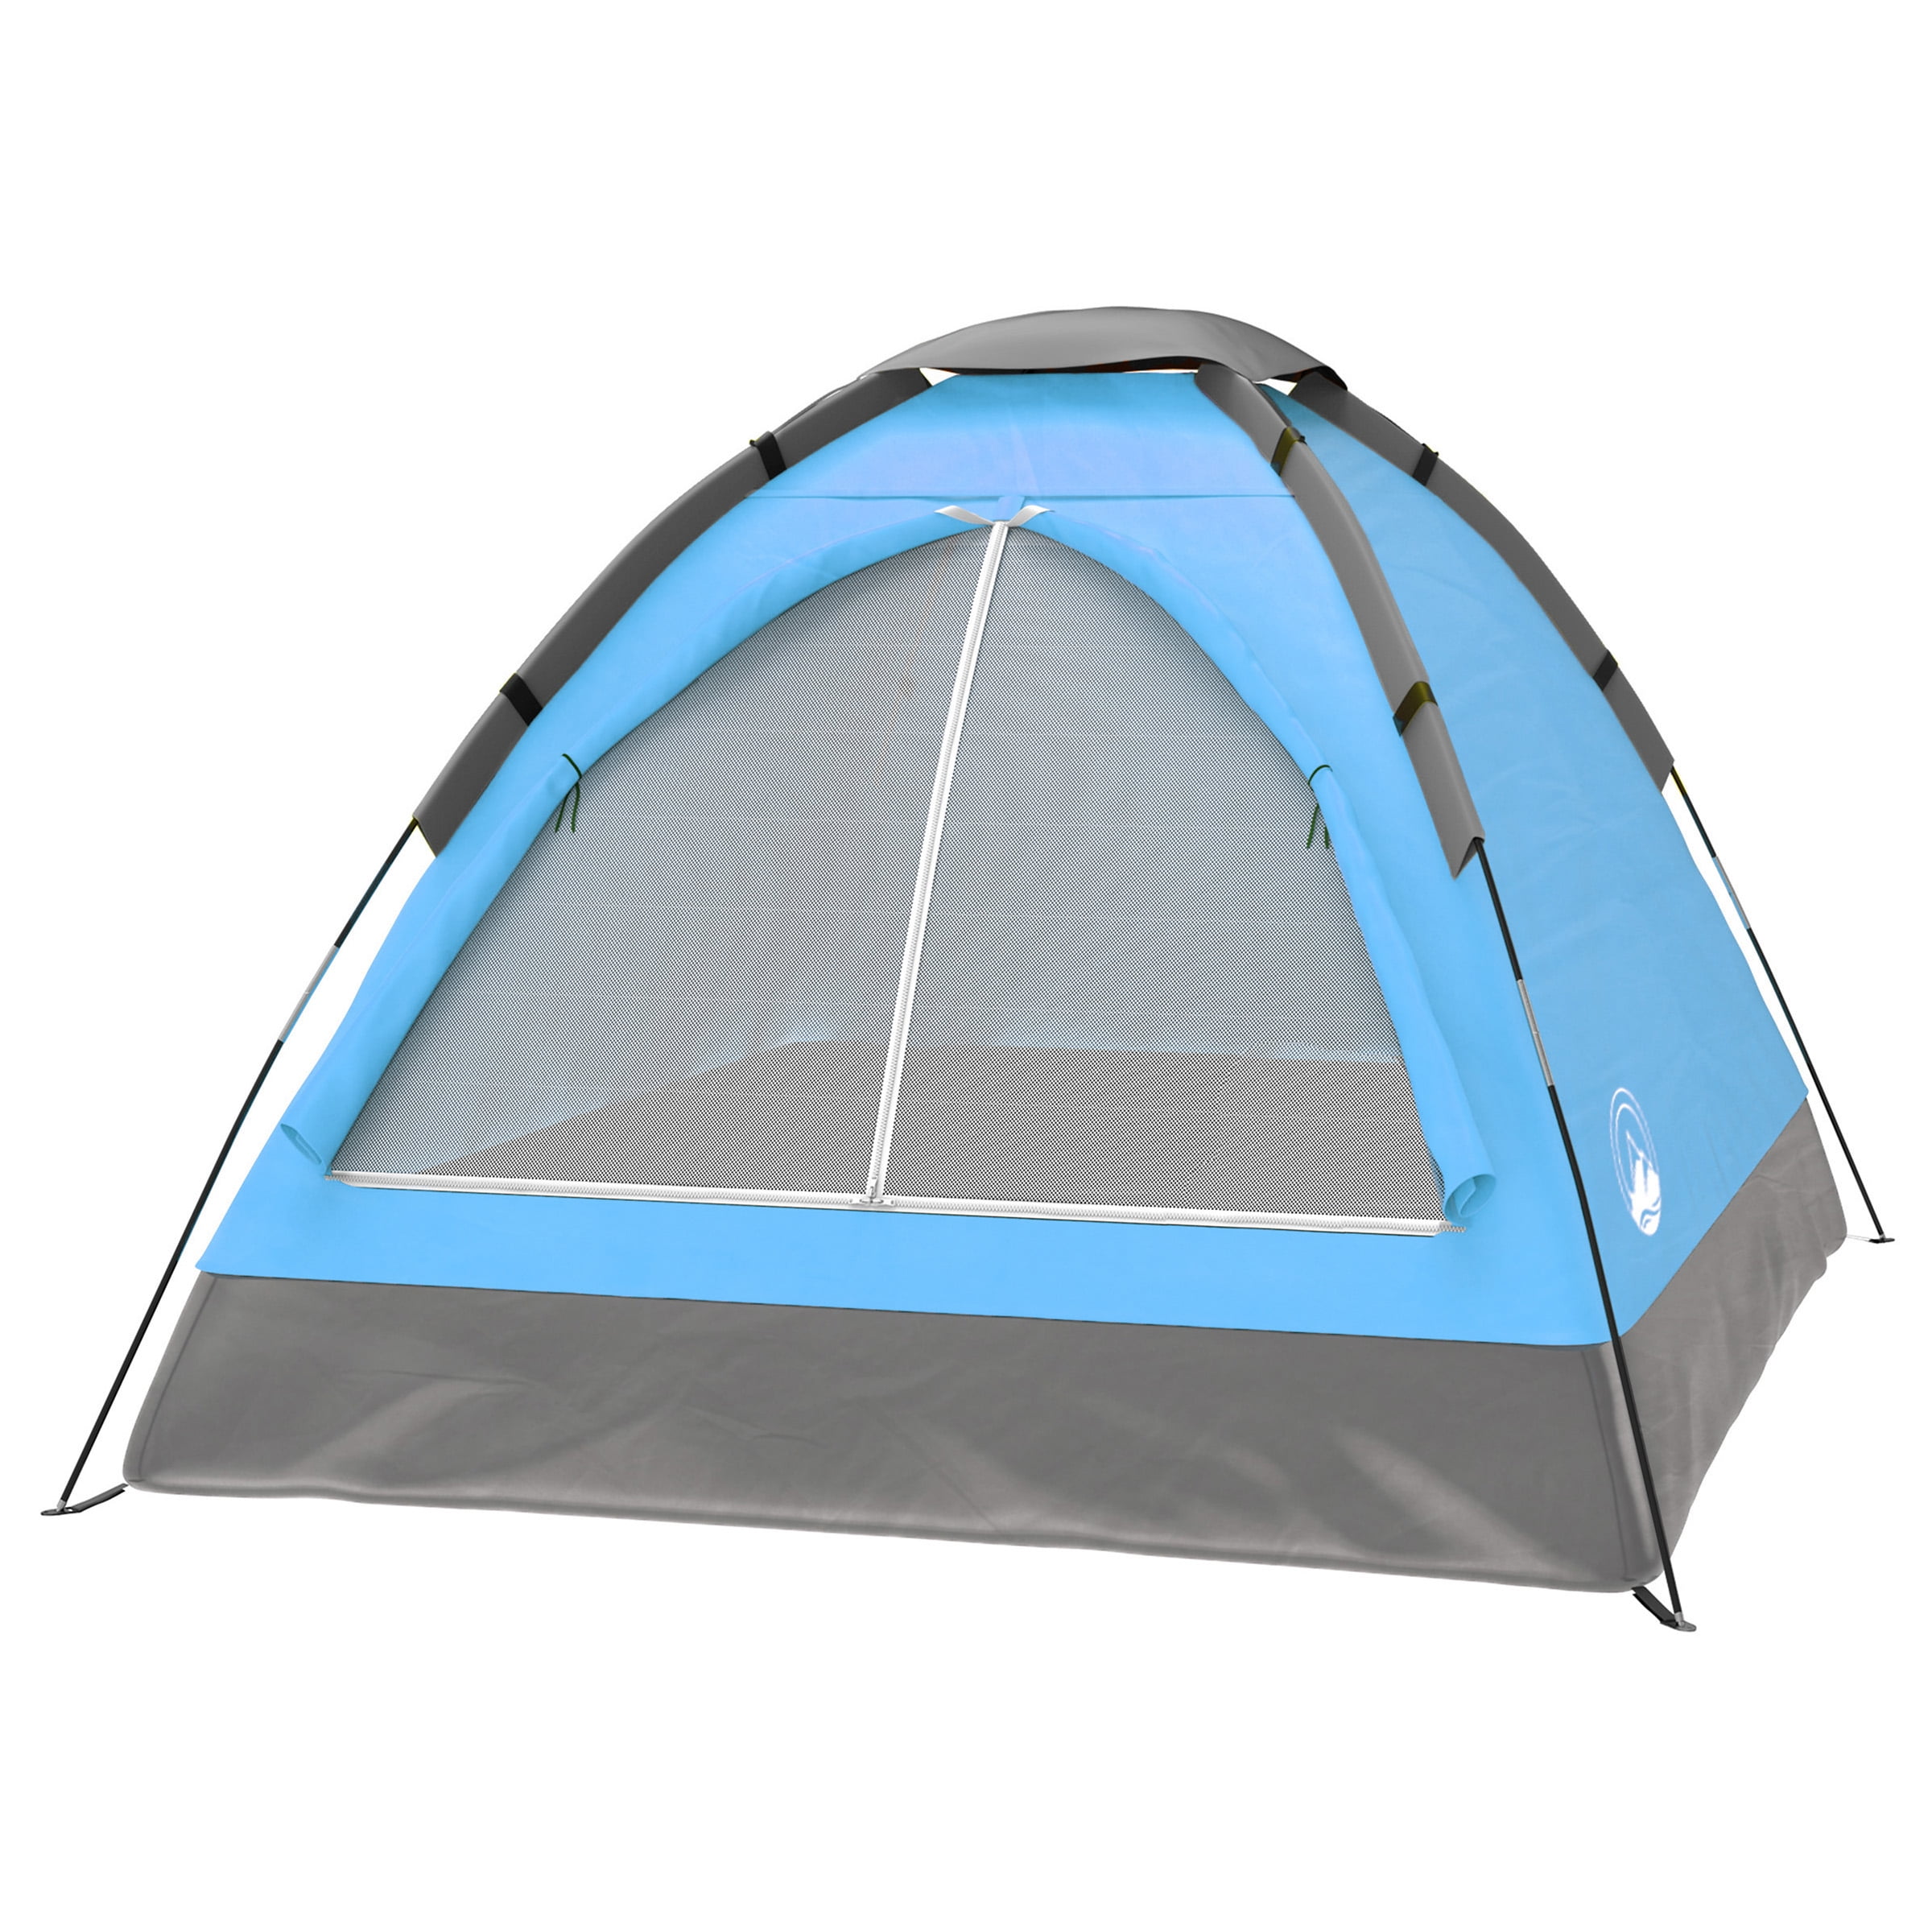 small pack size extremely light Outdoorer Helios beach shelter blue UV 60